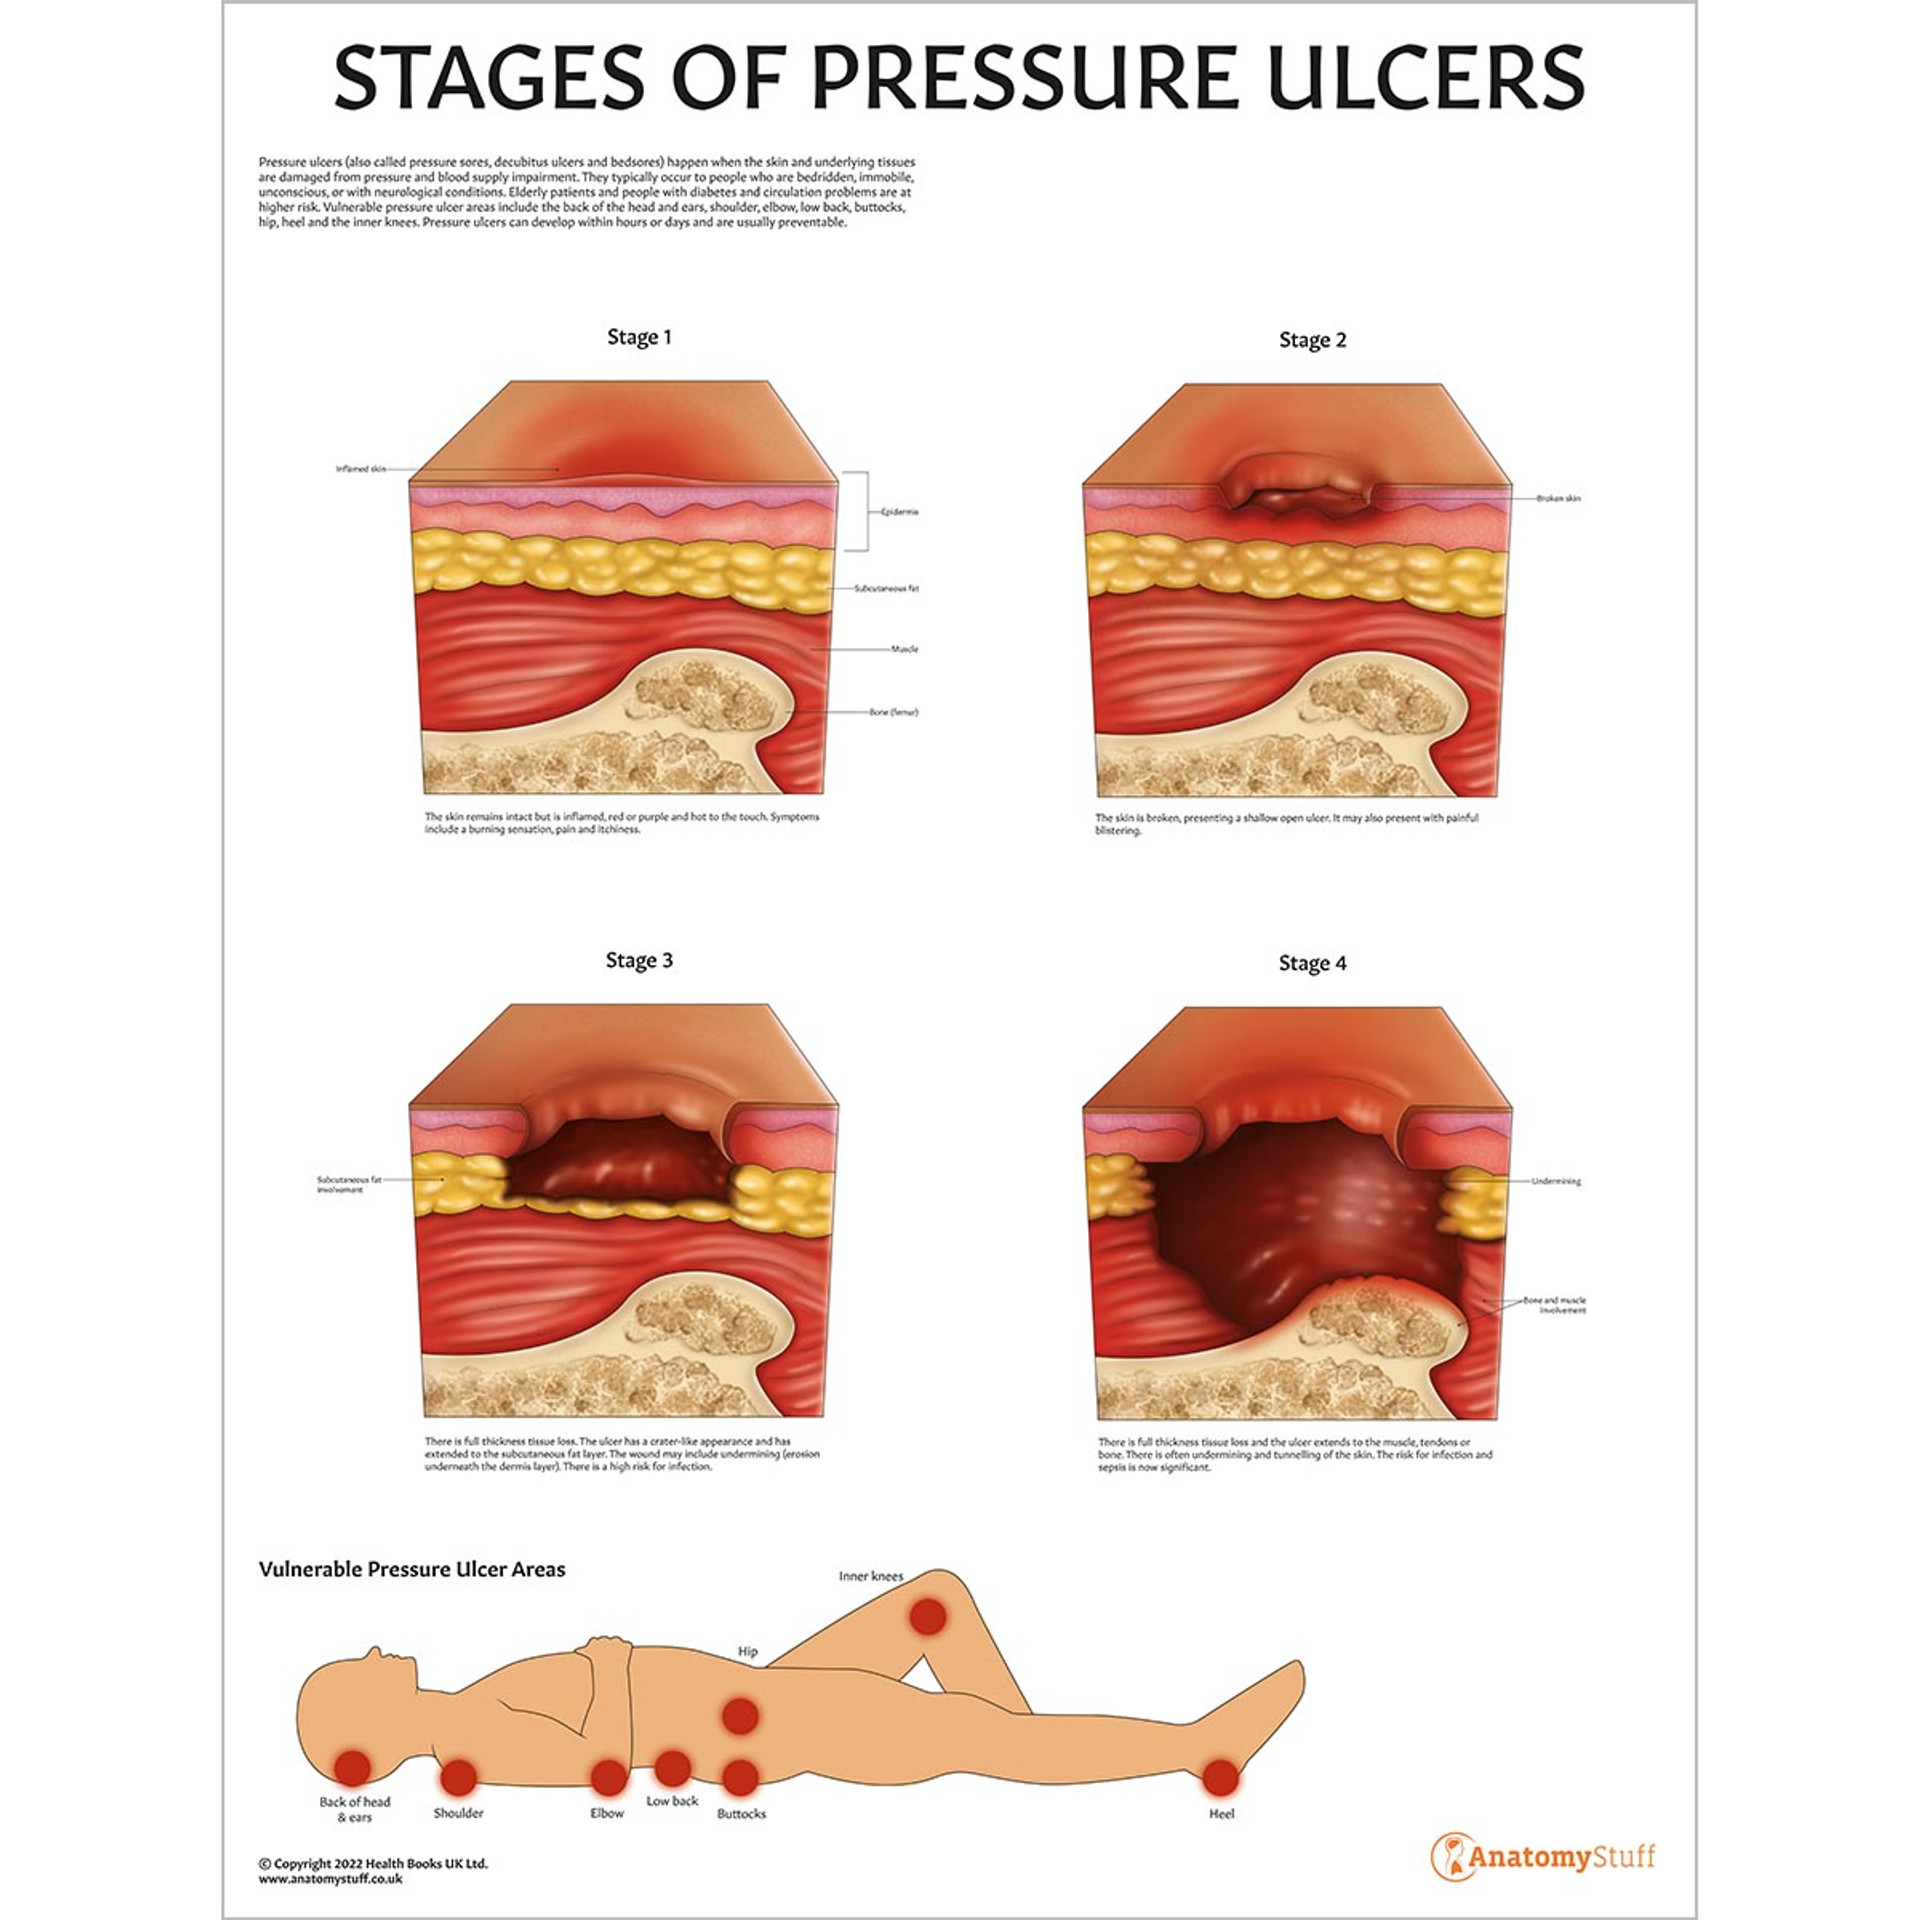 Stages Of Pressure Ulcers Poster Chart  12712.1648636706 ?c=1